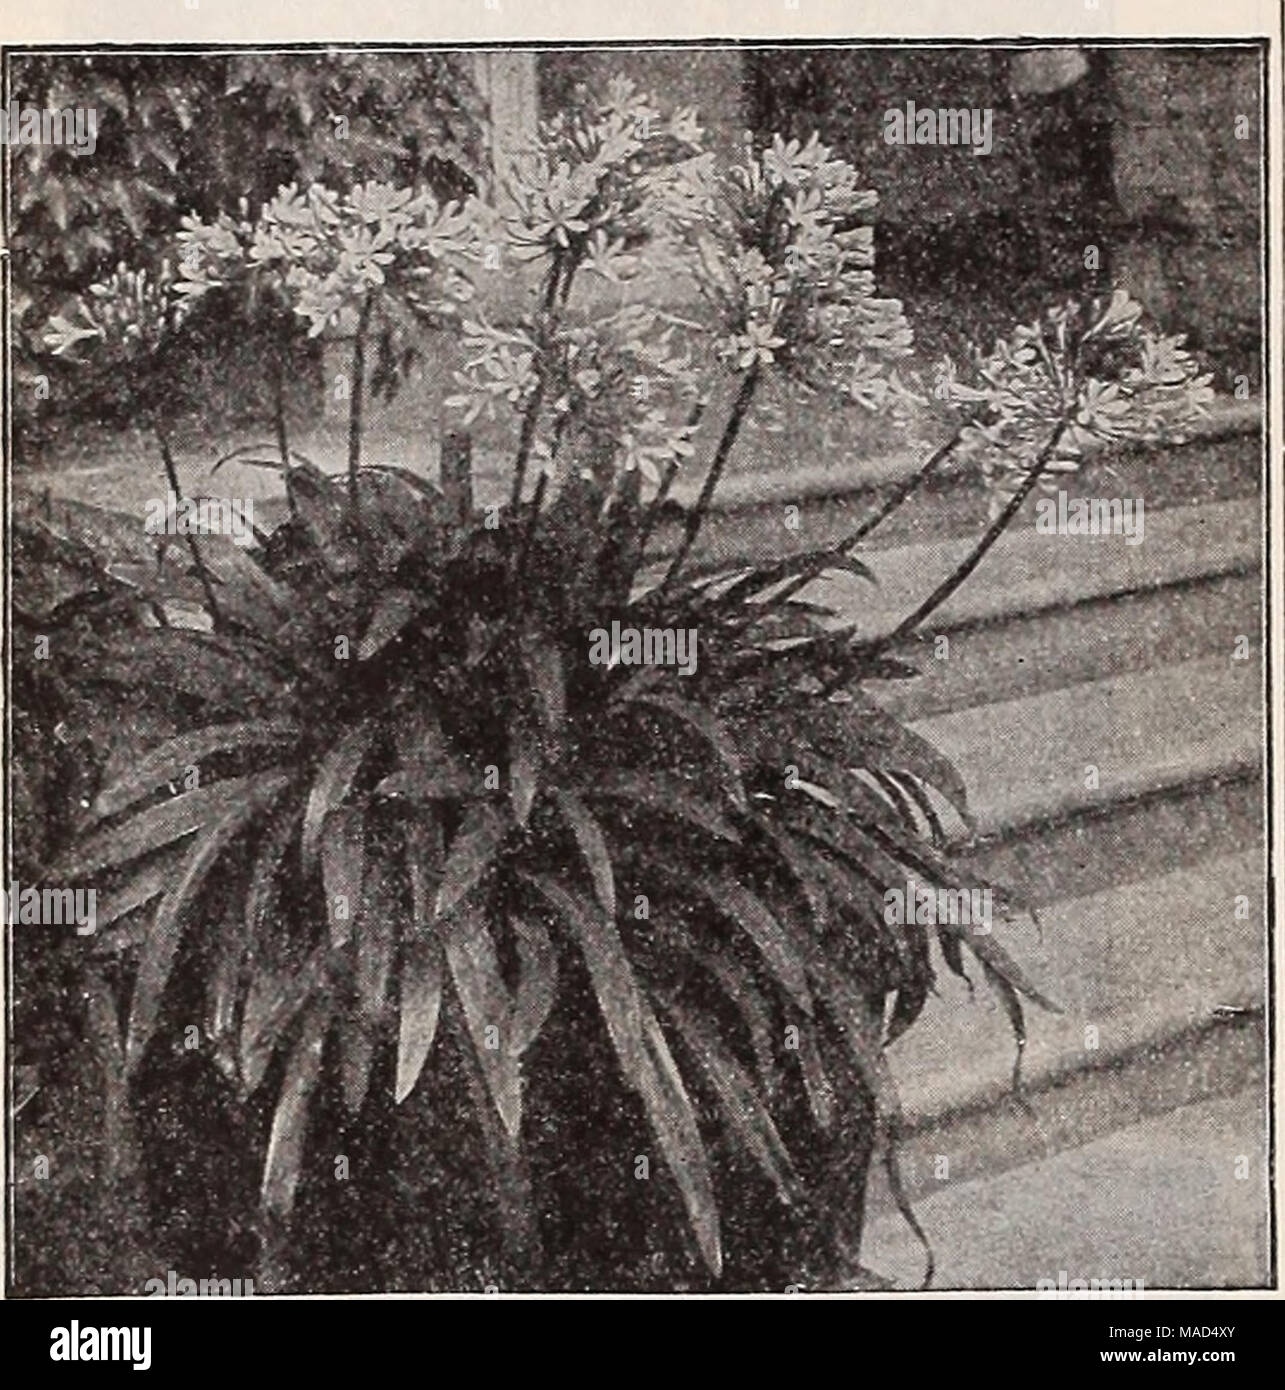 . Dreer's wholesale catalog for florists : winter - spring - summer 1938 . Asparagus Sprengeri . $1.00 per doz.: $6.00 per 10( DREERS ^' IOOth . ANNIVERSARY^ f Agapanthus umbellatus Agapanthus Umbellatus. Strong plants in 6-inch pots. 75c each. Strong plants in 8-inch tubs, $2.00 each. Agl&lt; laonema UodeBttuu (Chinese Evergreen). Showy rich green leaves. A choice house plant that may be grown In soil or in bowls filled with water. 3-inch pots, $3.00 per doz.; $20.00 per 100. Allamanda Williamsl. Forms a compact bushy plant with large, rich yellow flowers at every joint; sweet scented. Strong Stock Photo